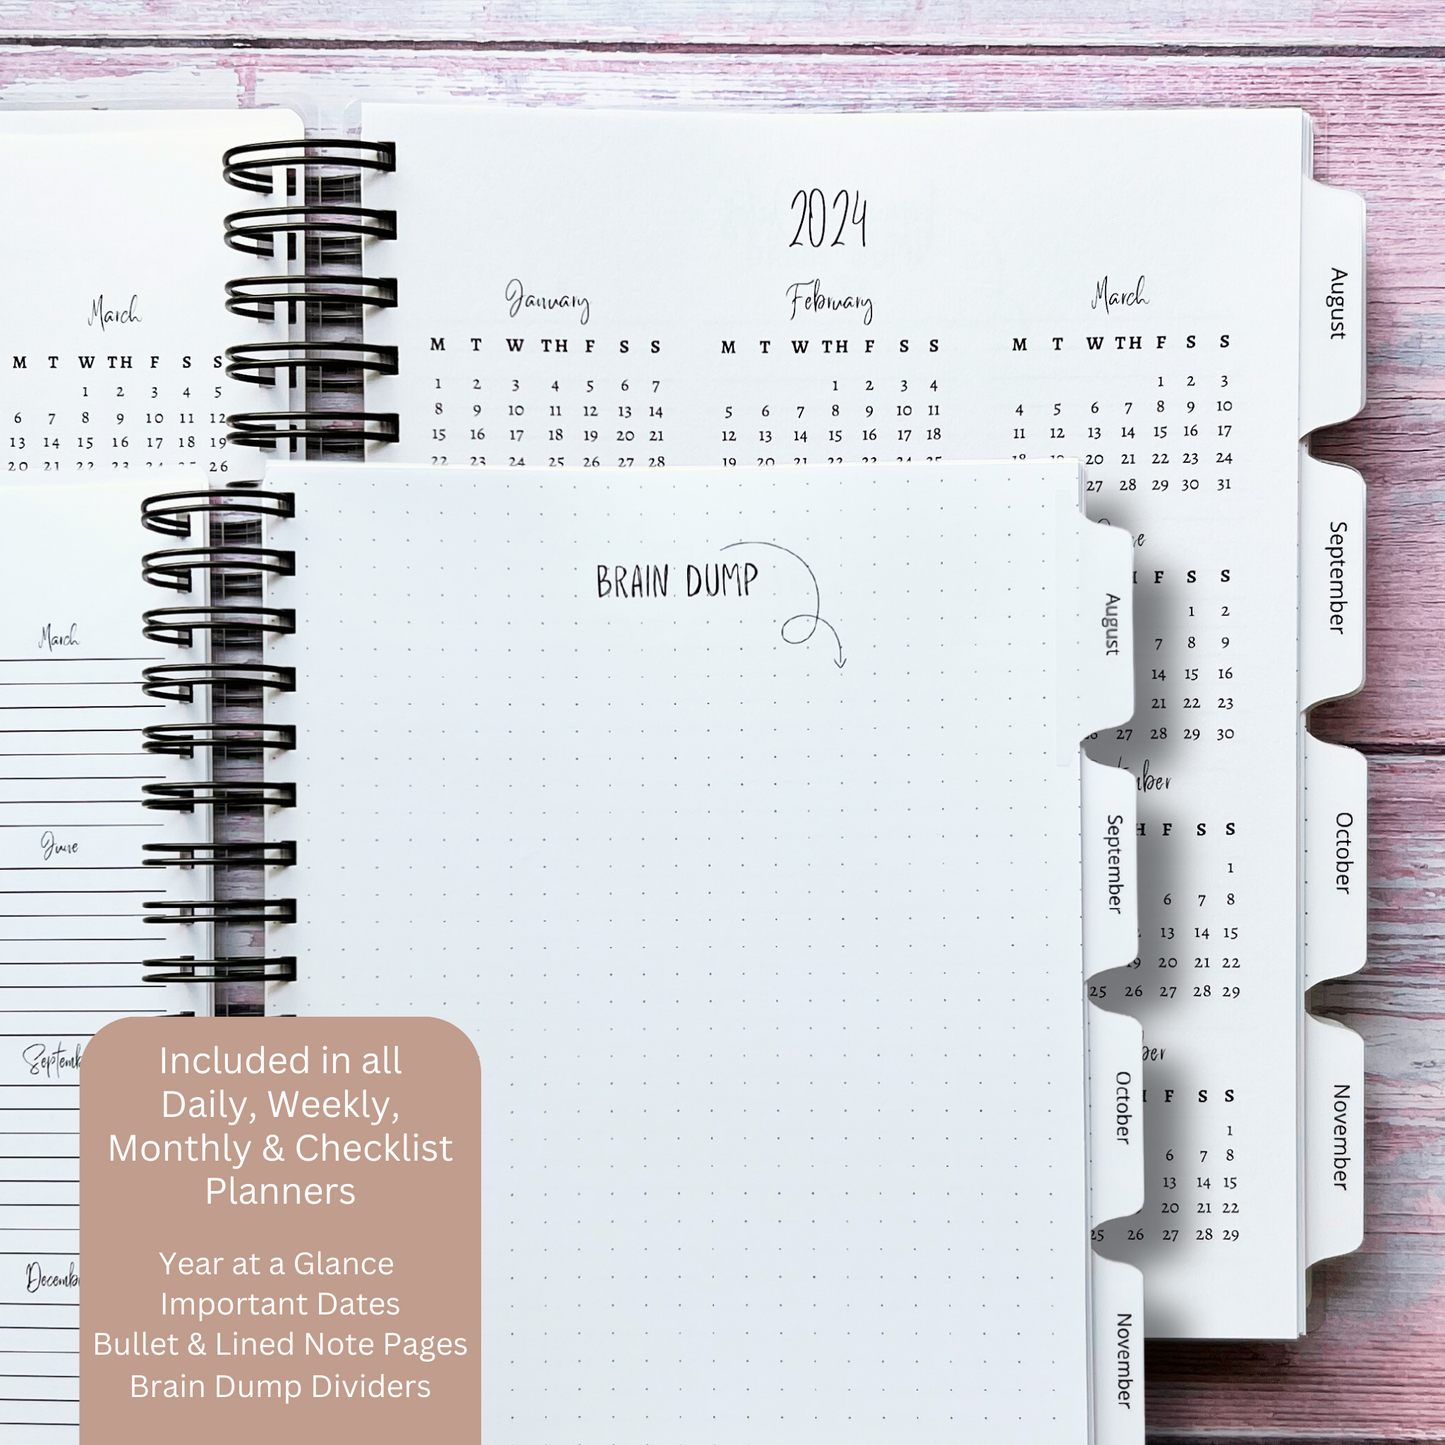 Personalized Monthly Planner - Whimsical Space